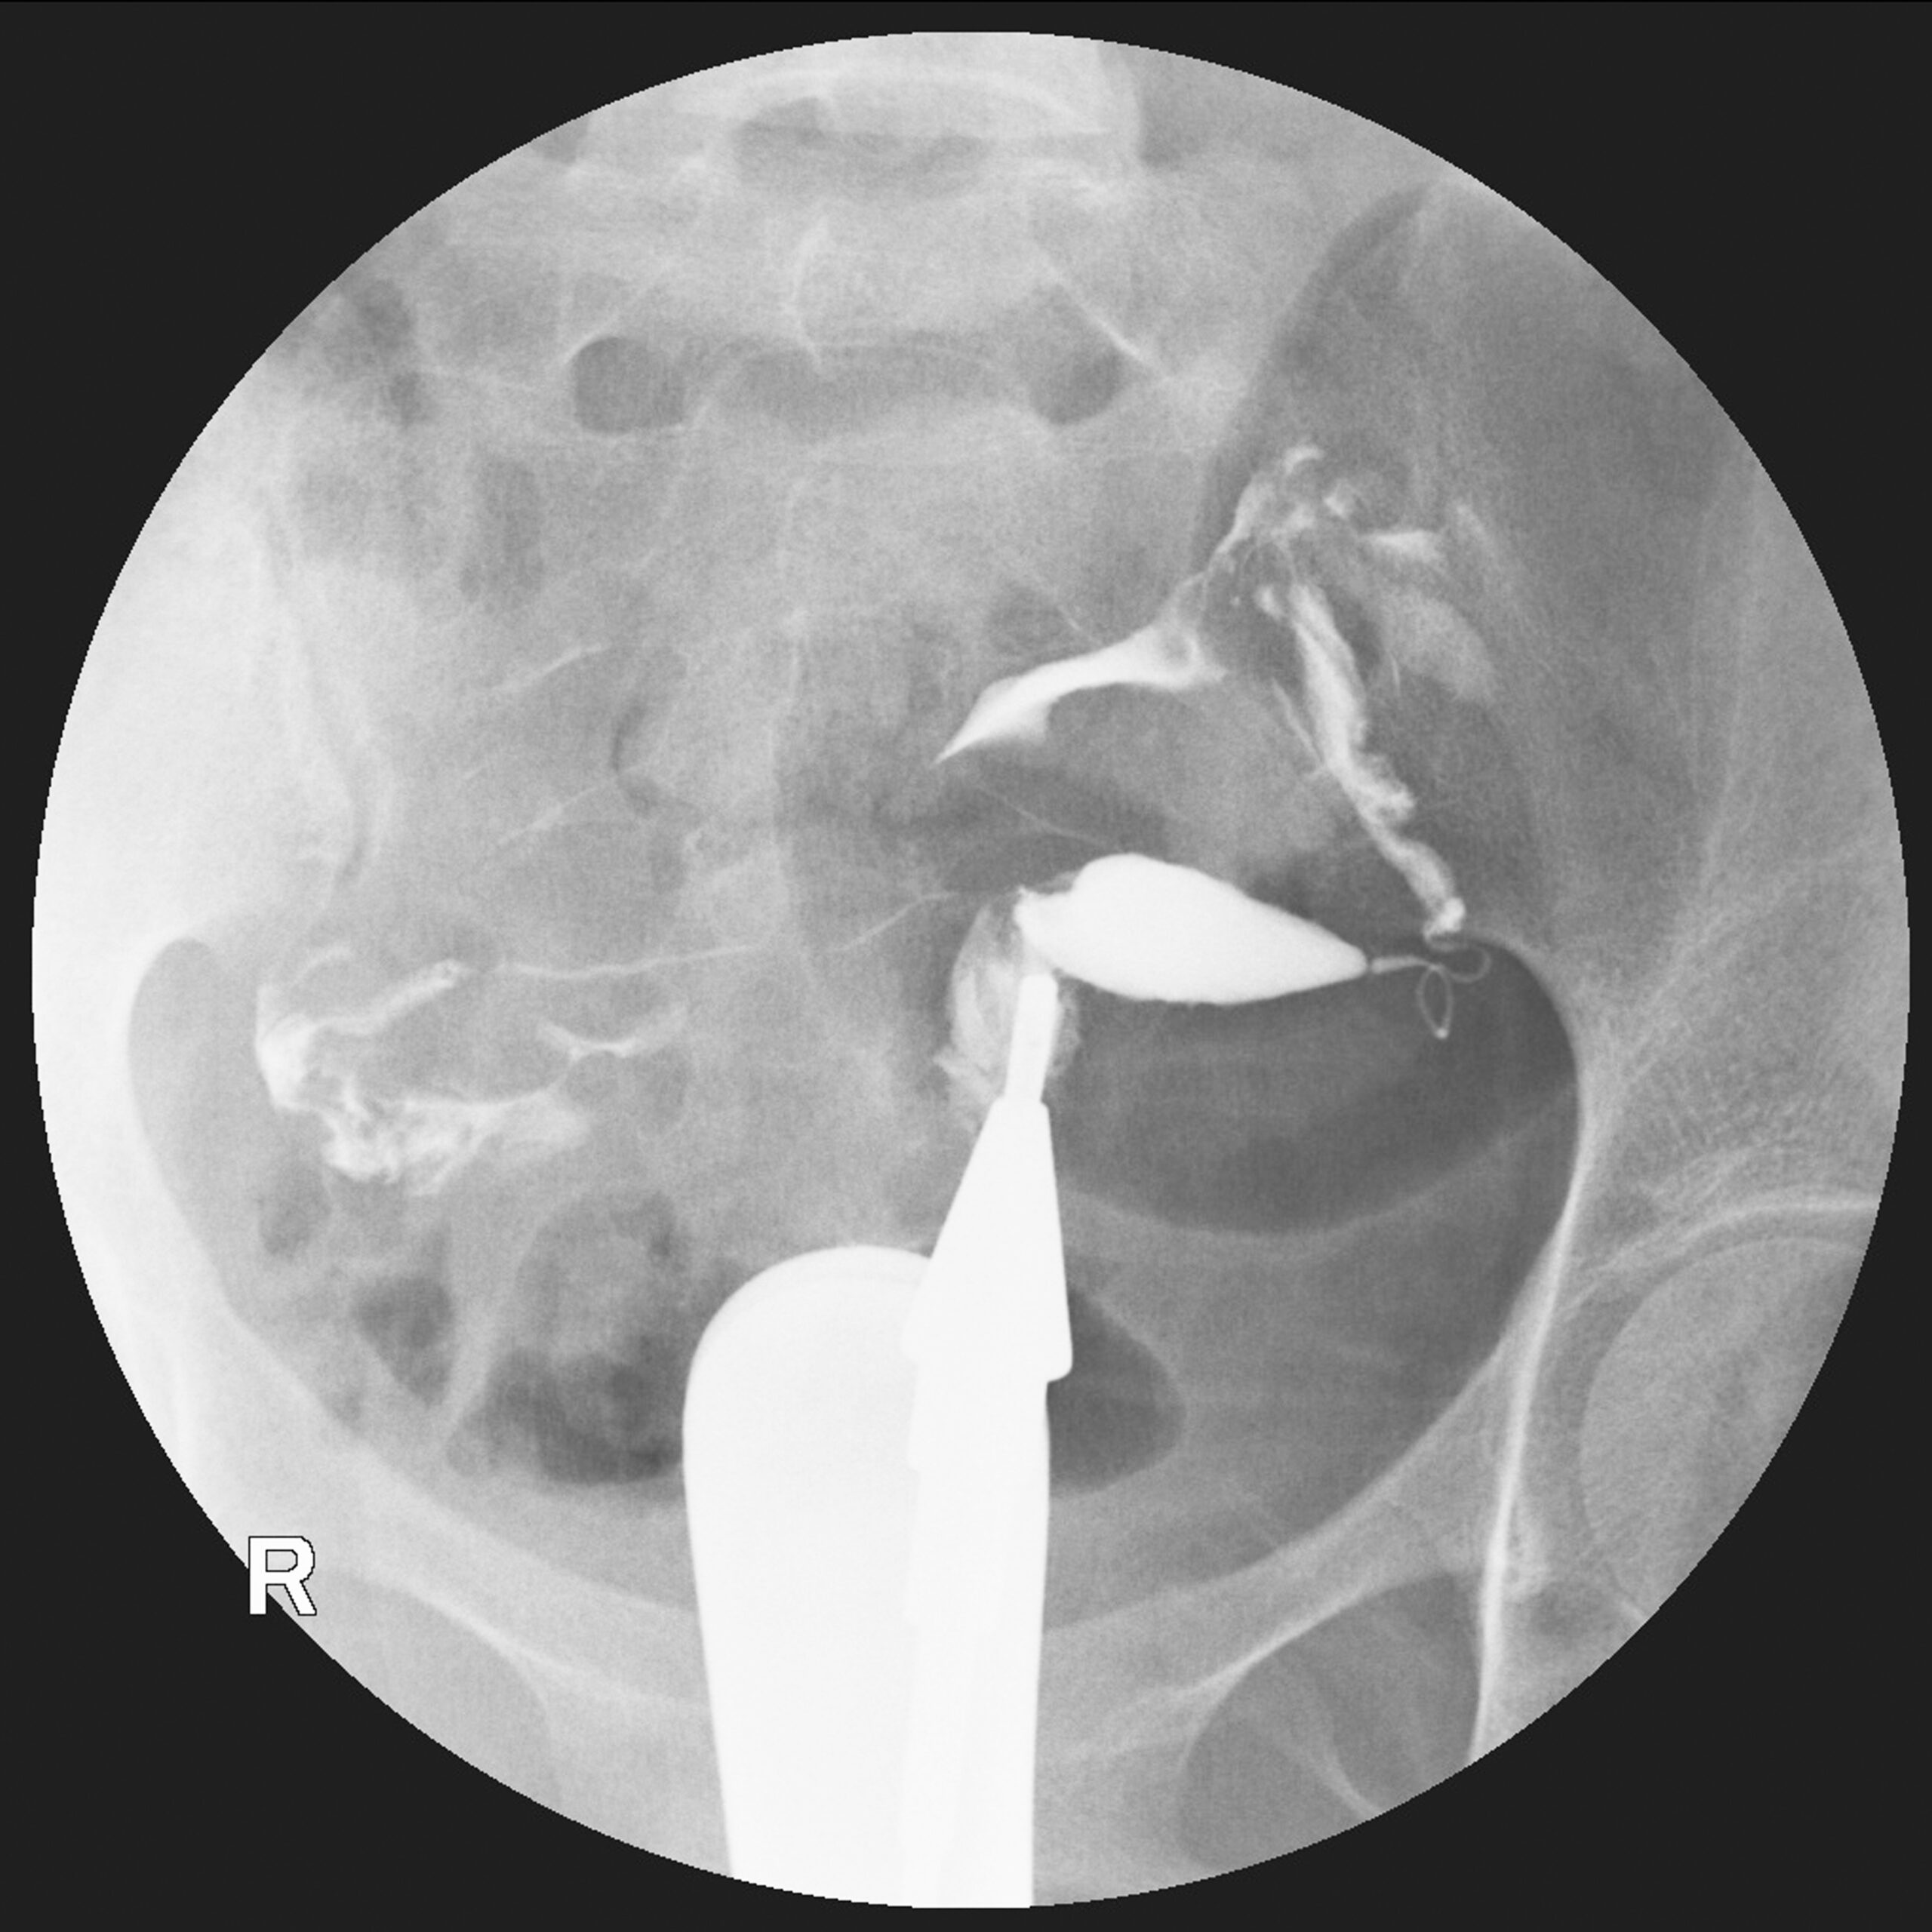 Hysterosalpingography (HSG) is a fluoroscopic X-ray study of a woman's uterus and fallopian tubes